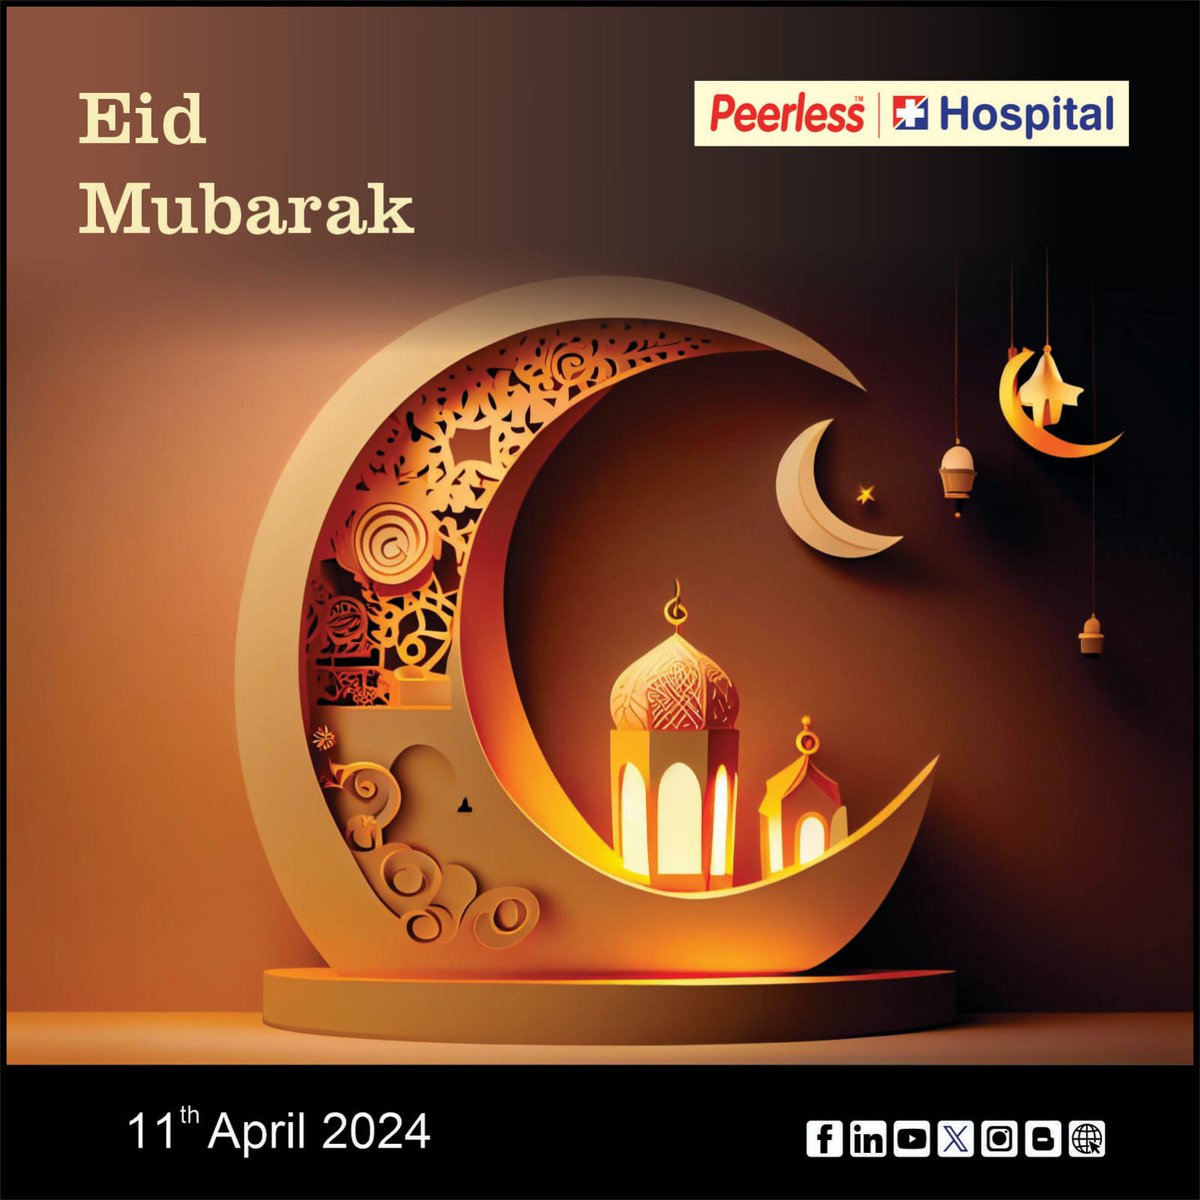 Wishing you health, joy, peace, and prosperity this Eid! May this auspicious occasion bring you and your loved ones abundant blessings and good health. Eid Mubarak from Peerless Hospital!

#PeerlessHospital #Healthcare #Kolkata #Eid #Eid2024 #EidMubarak